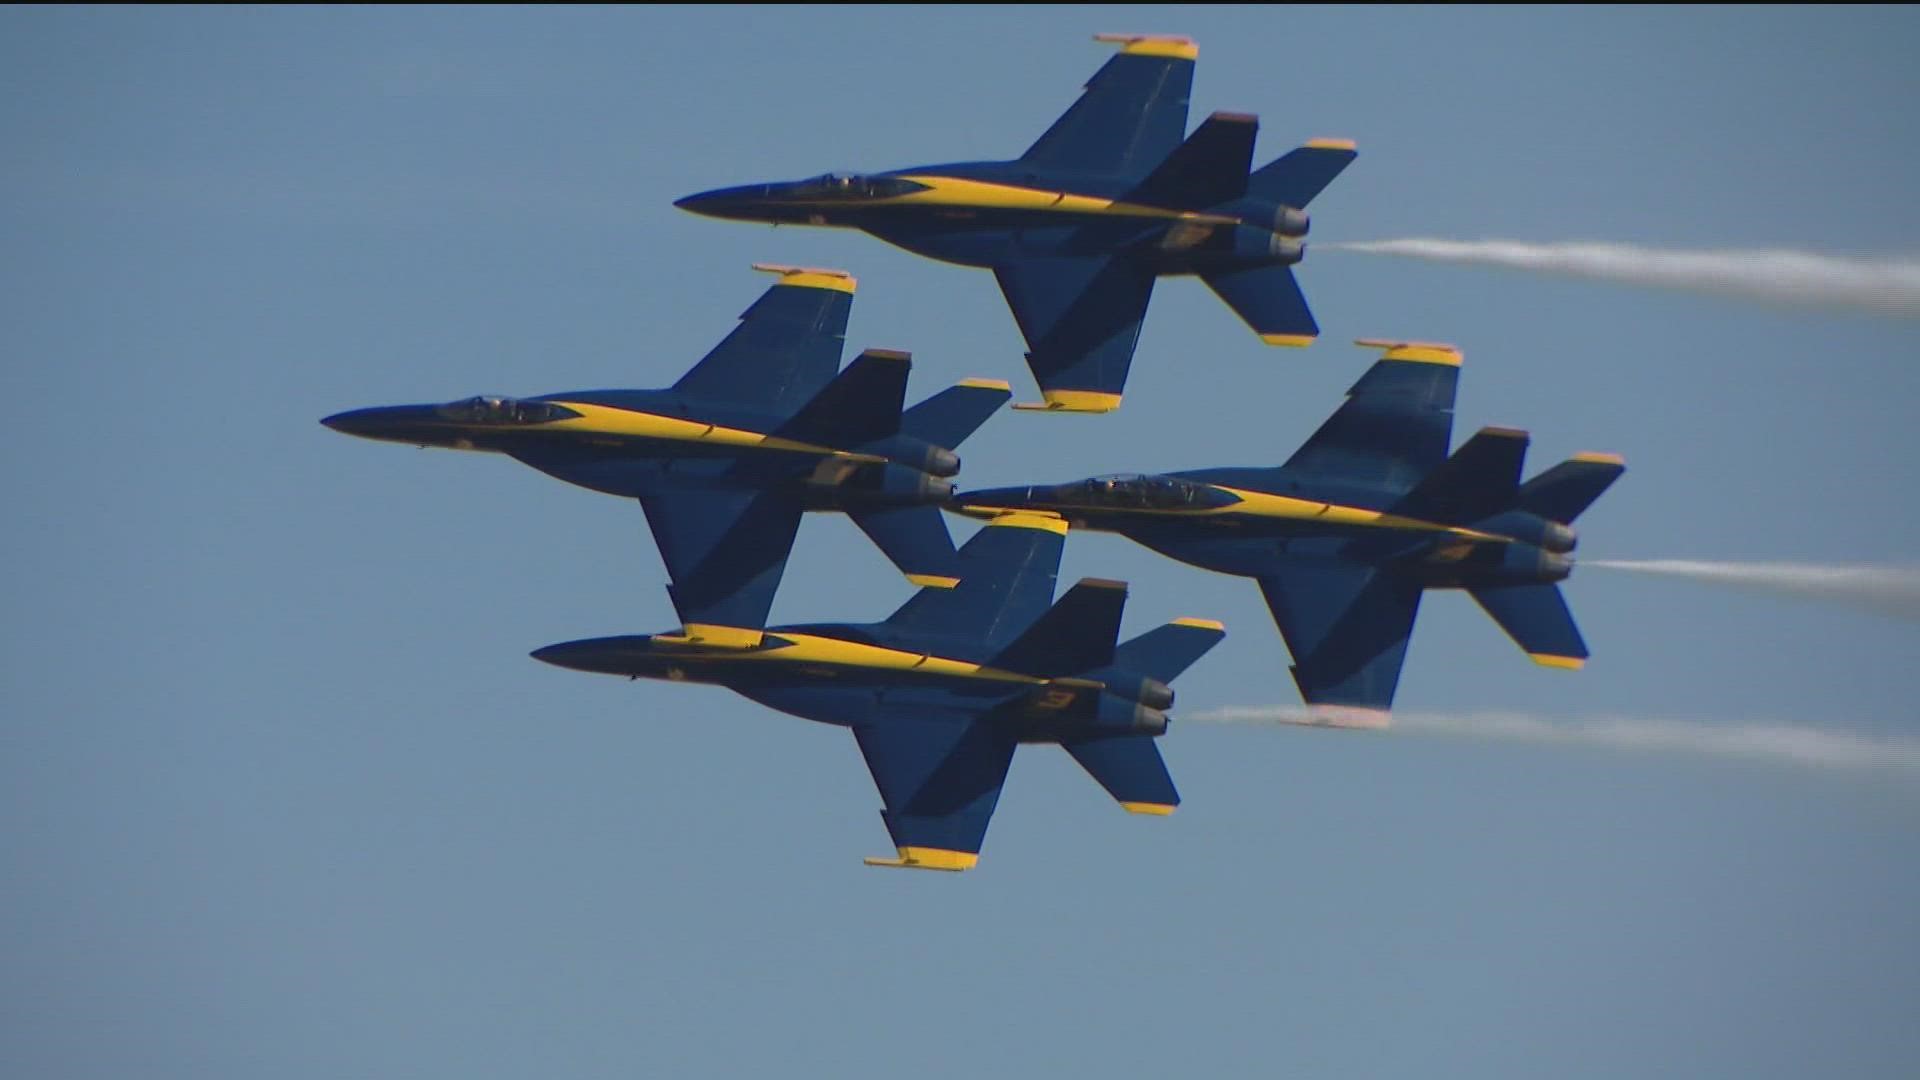 Miramar Air Show roars back! What you can expect to see and hear this